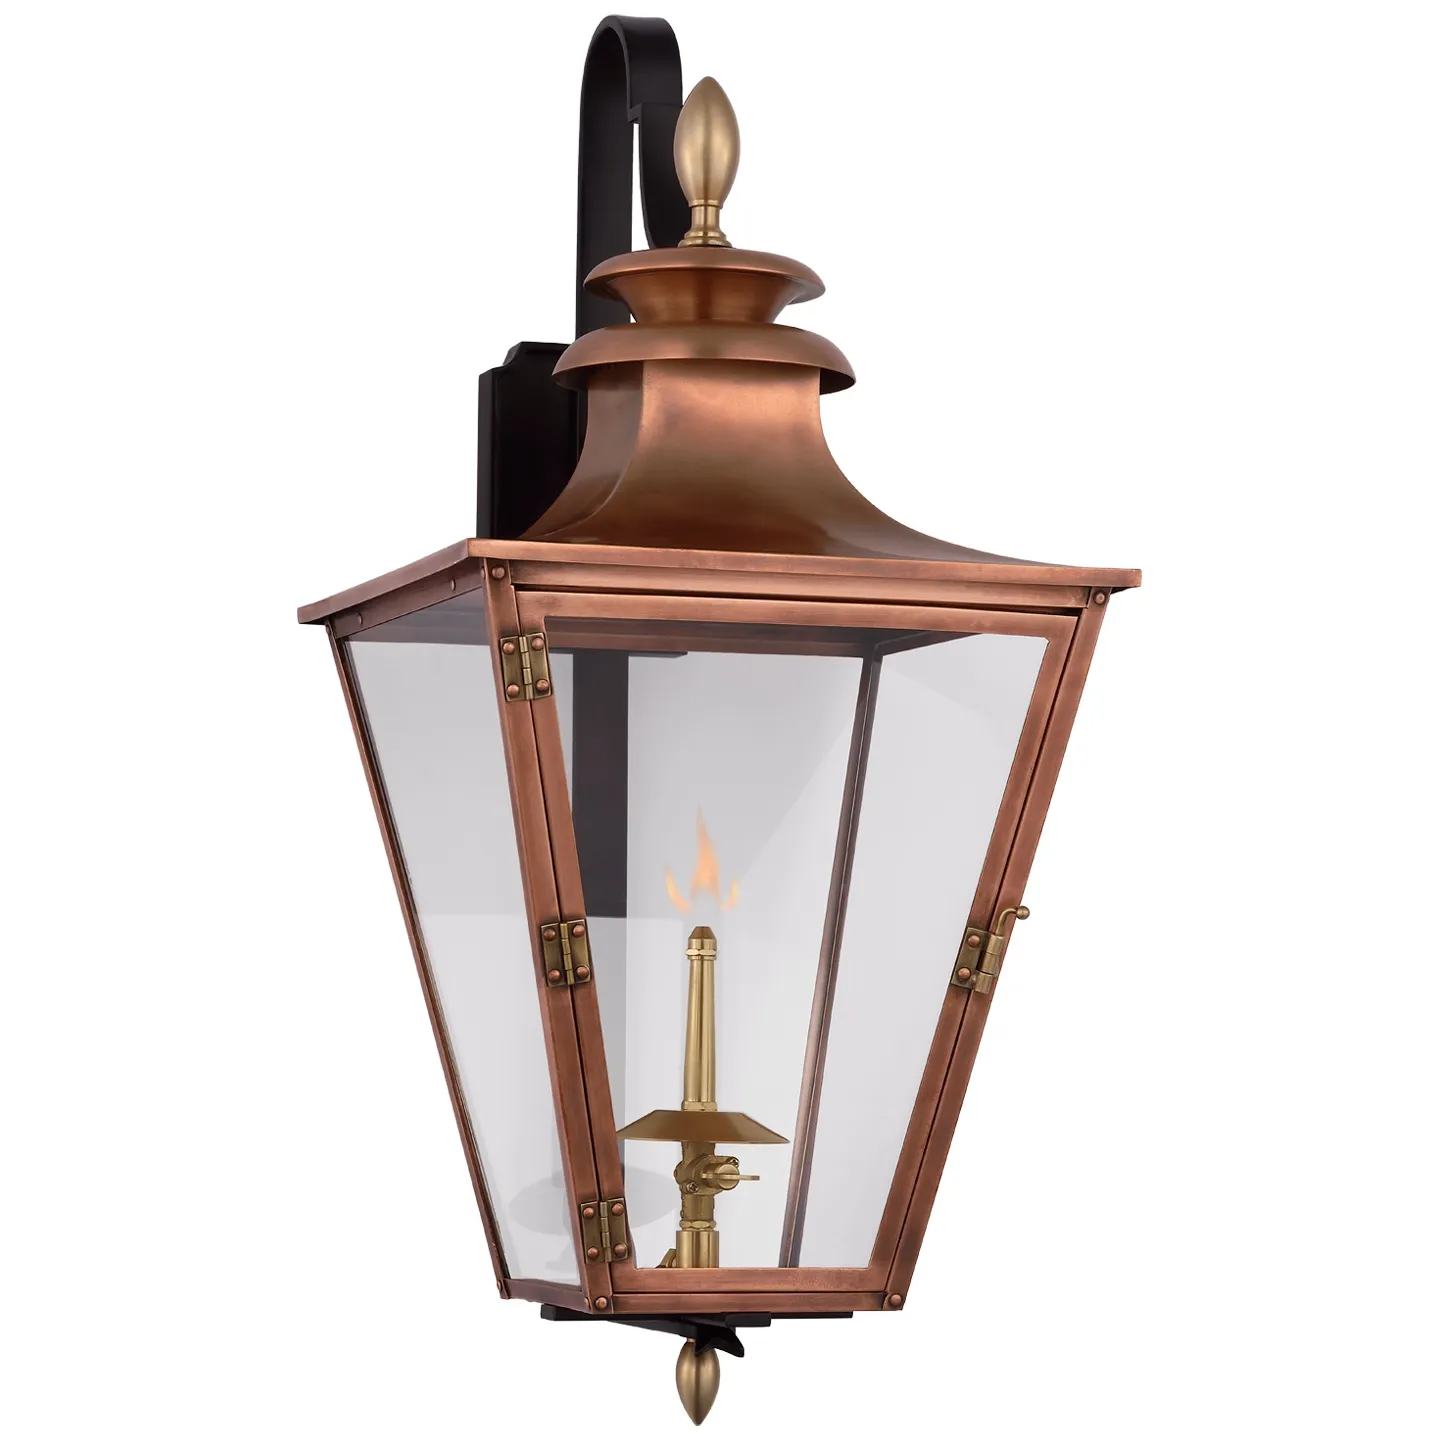 Albermarle Small Bracketed Gas Wall Lantern in Soft Copper and Brass with Clear Glass